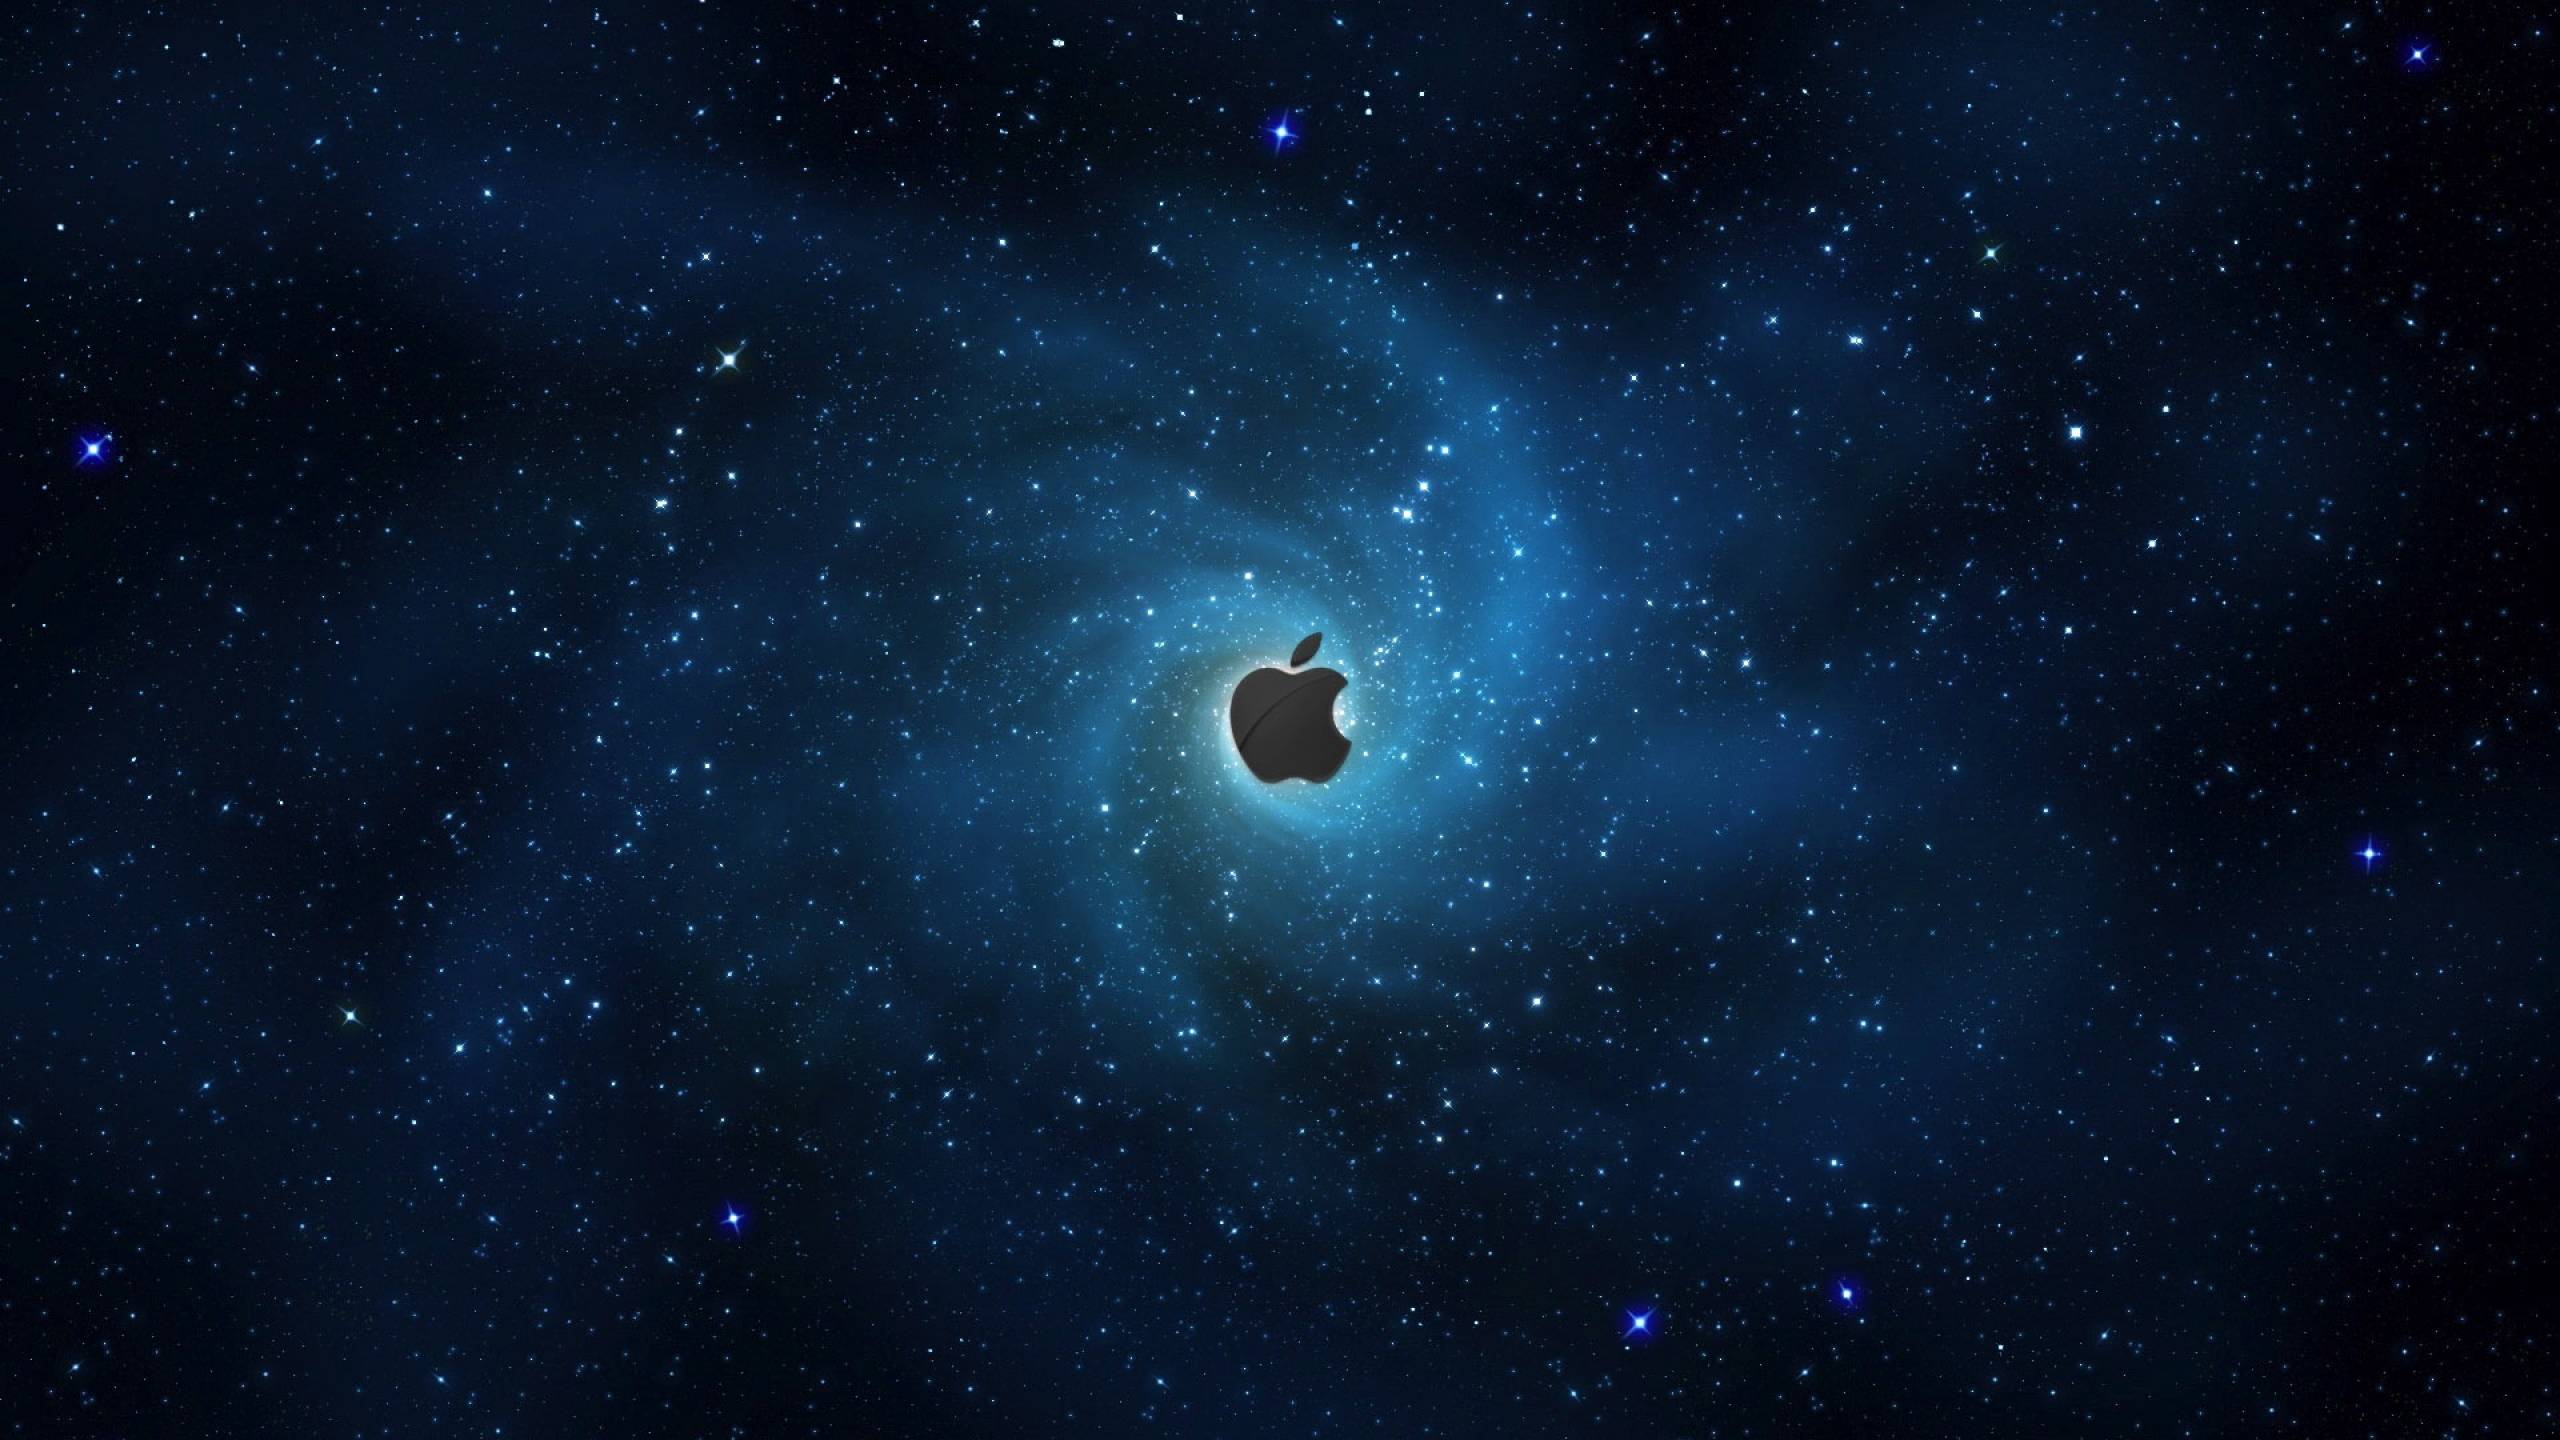 Apple In Stars wallpaper for your iMac. HD Wallpaper Source